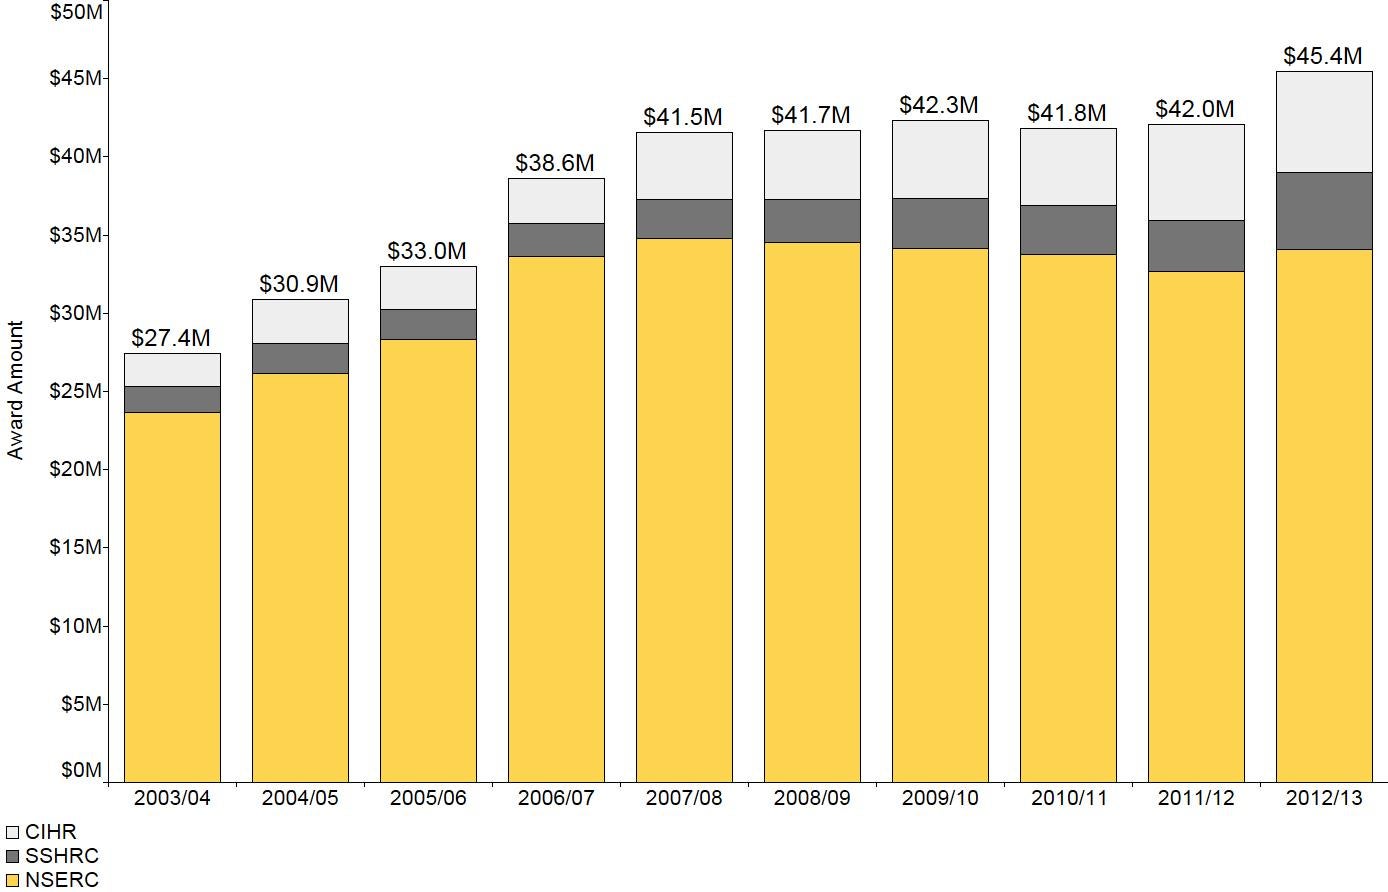 This figure shows the dollar amount of NSERC, SSHRC and CIHR research funding between 2003/04 and 2012/13. The amount has remained consistent between 2007/08 and 2011/12.  Data for this figure are in the Data Table section.